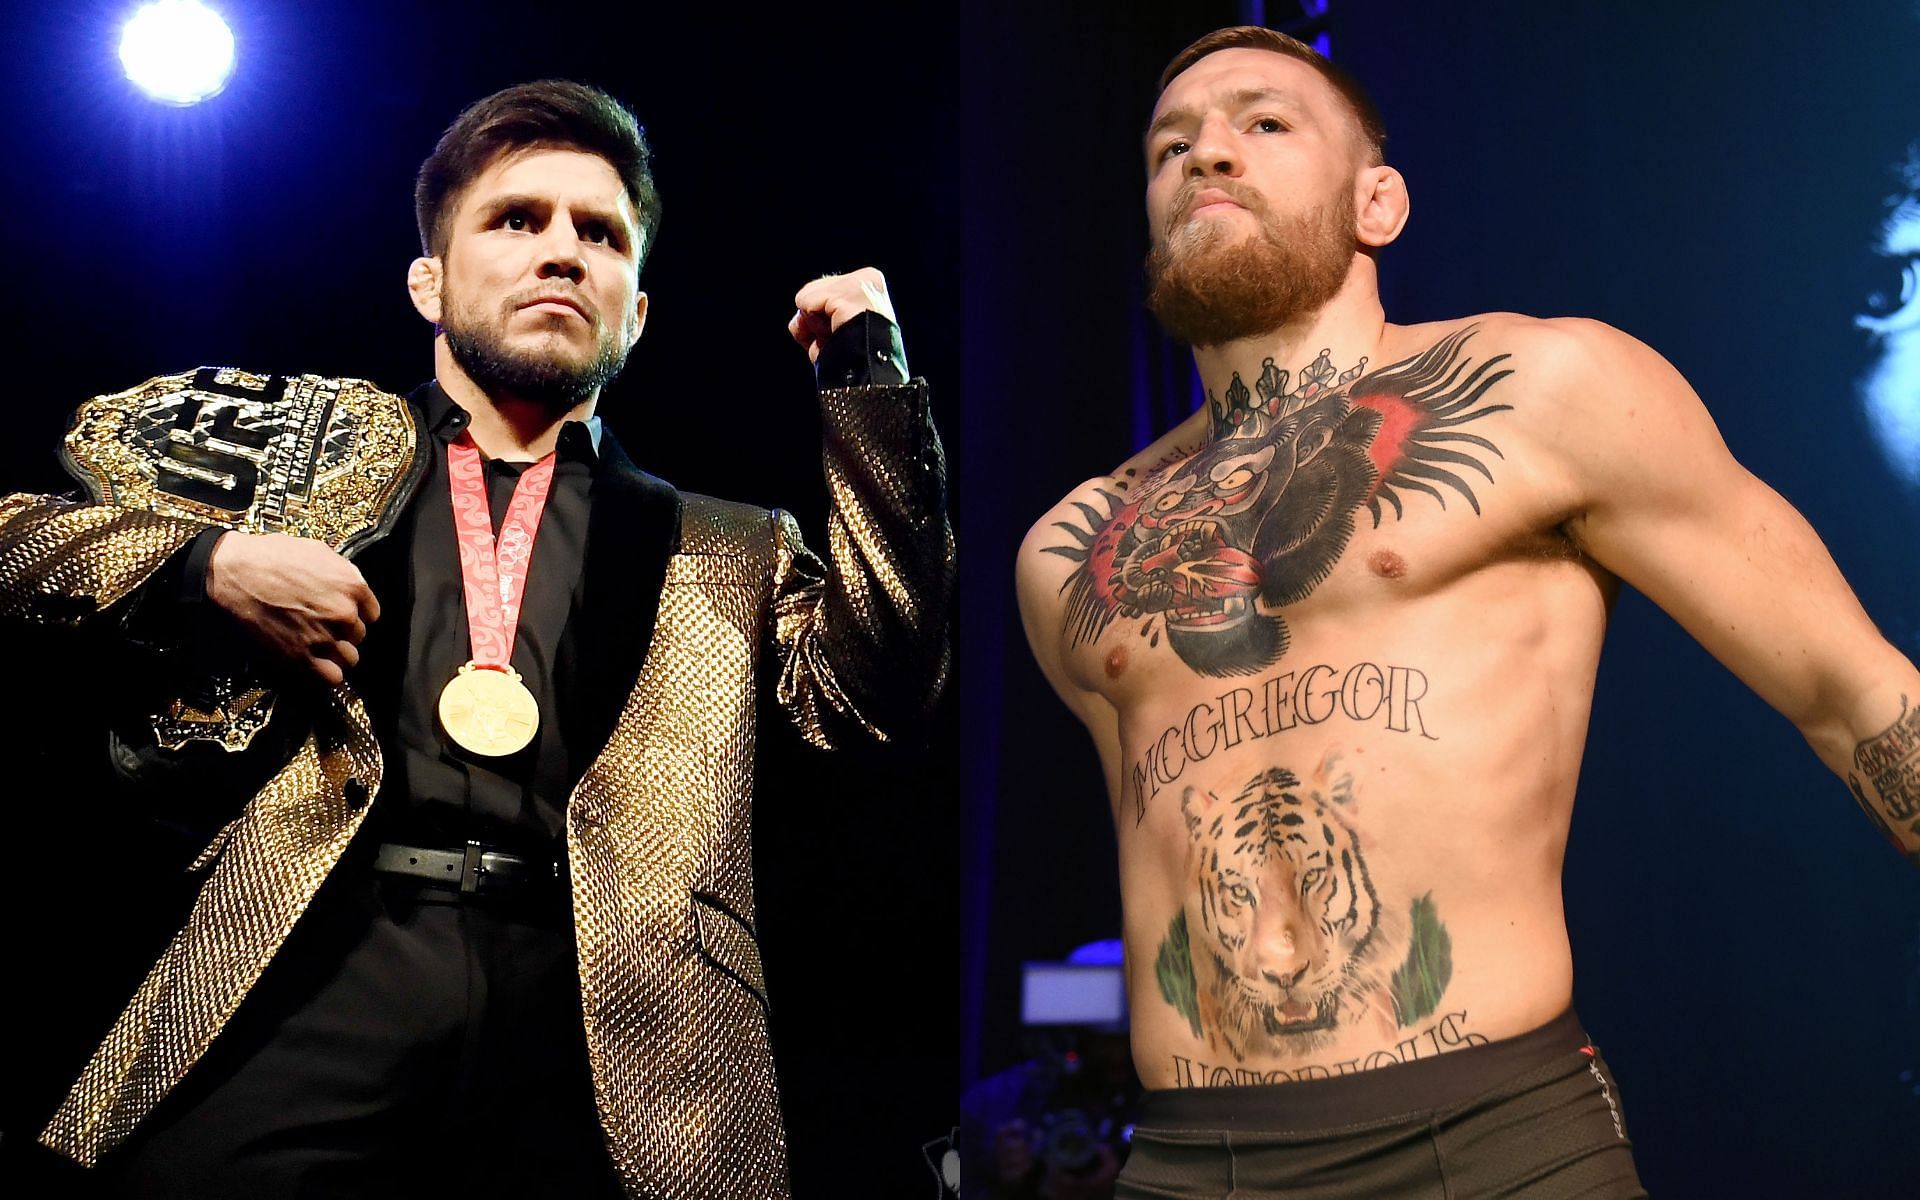 Henry Cejudo (left) and Conor McGregor (right) (Images via Getty)